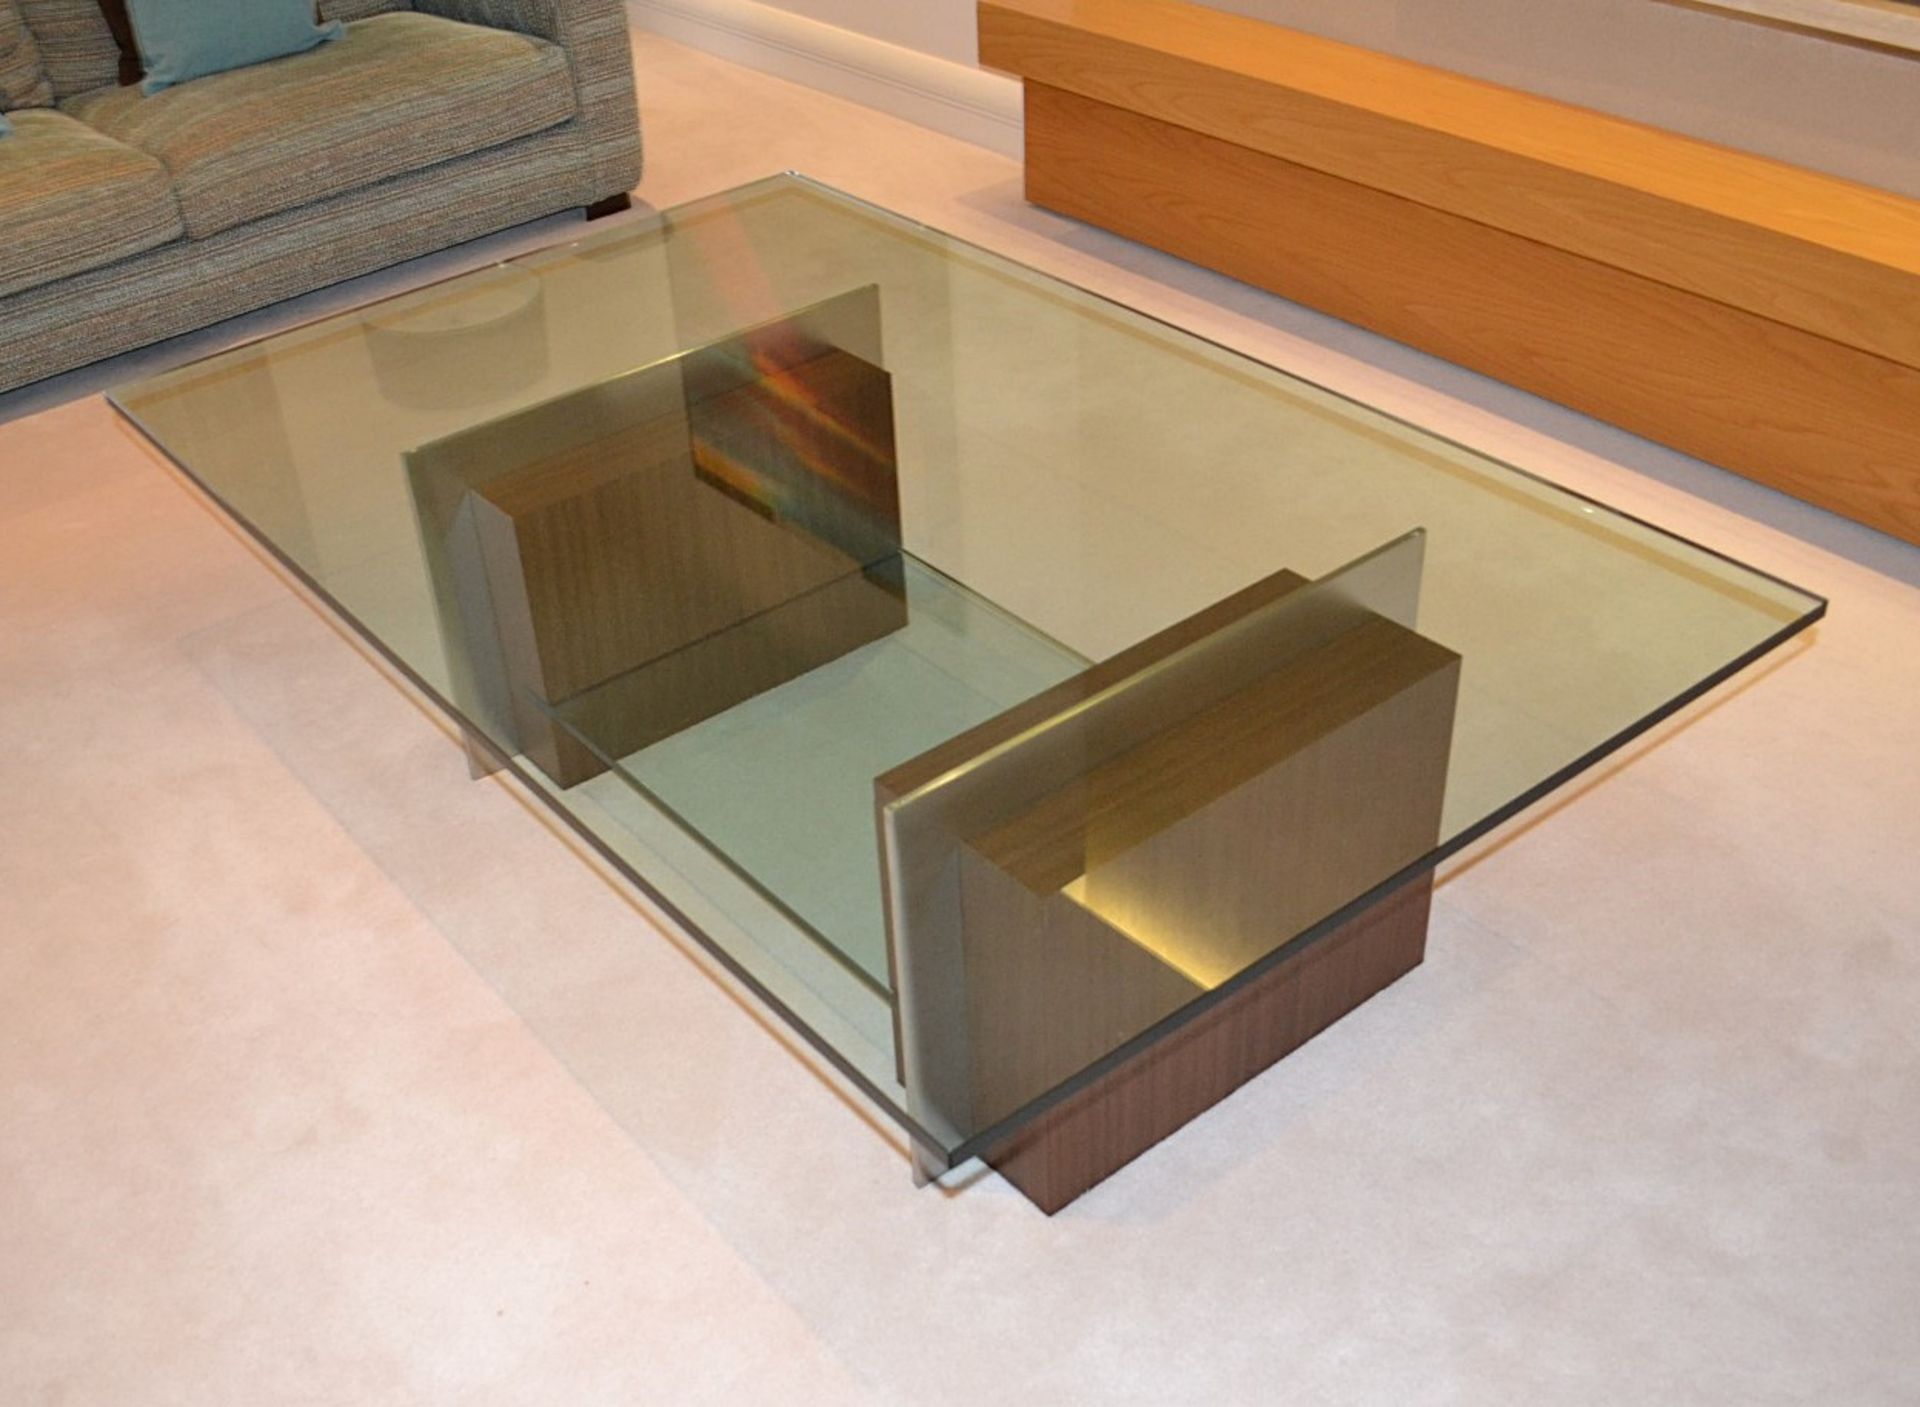 1 x Modern Large Glass Coffee Table With Glass Shelf And Stylish Square Bases - NO VAT ON HAMMER - Image 2 of 3